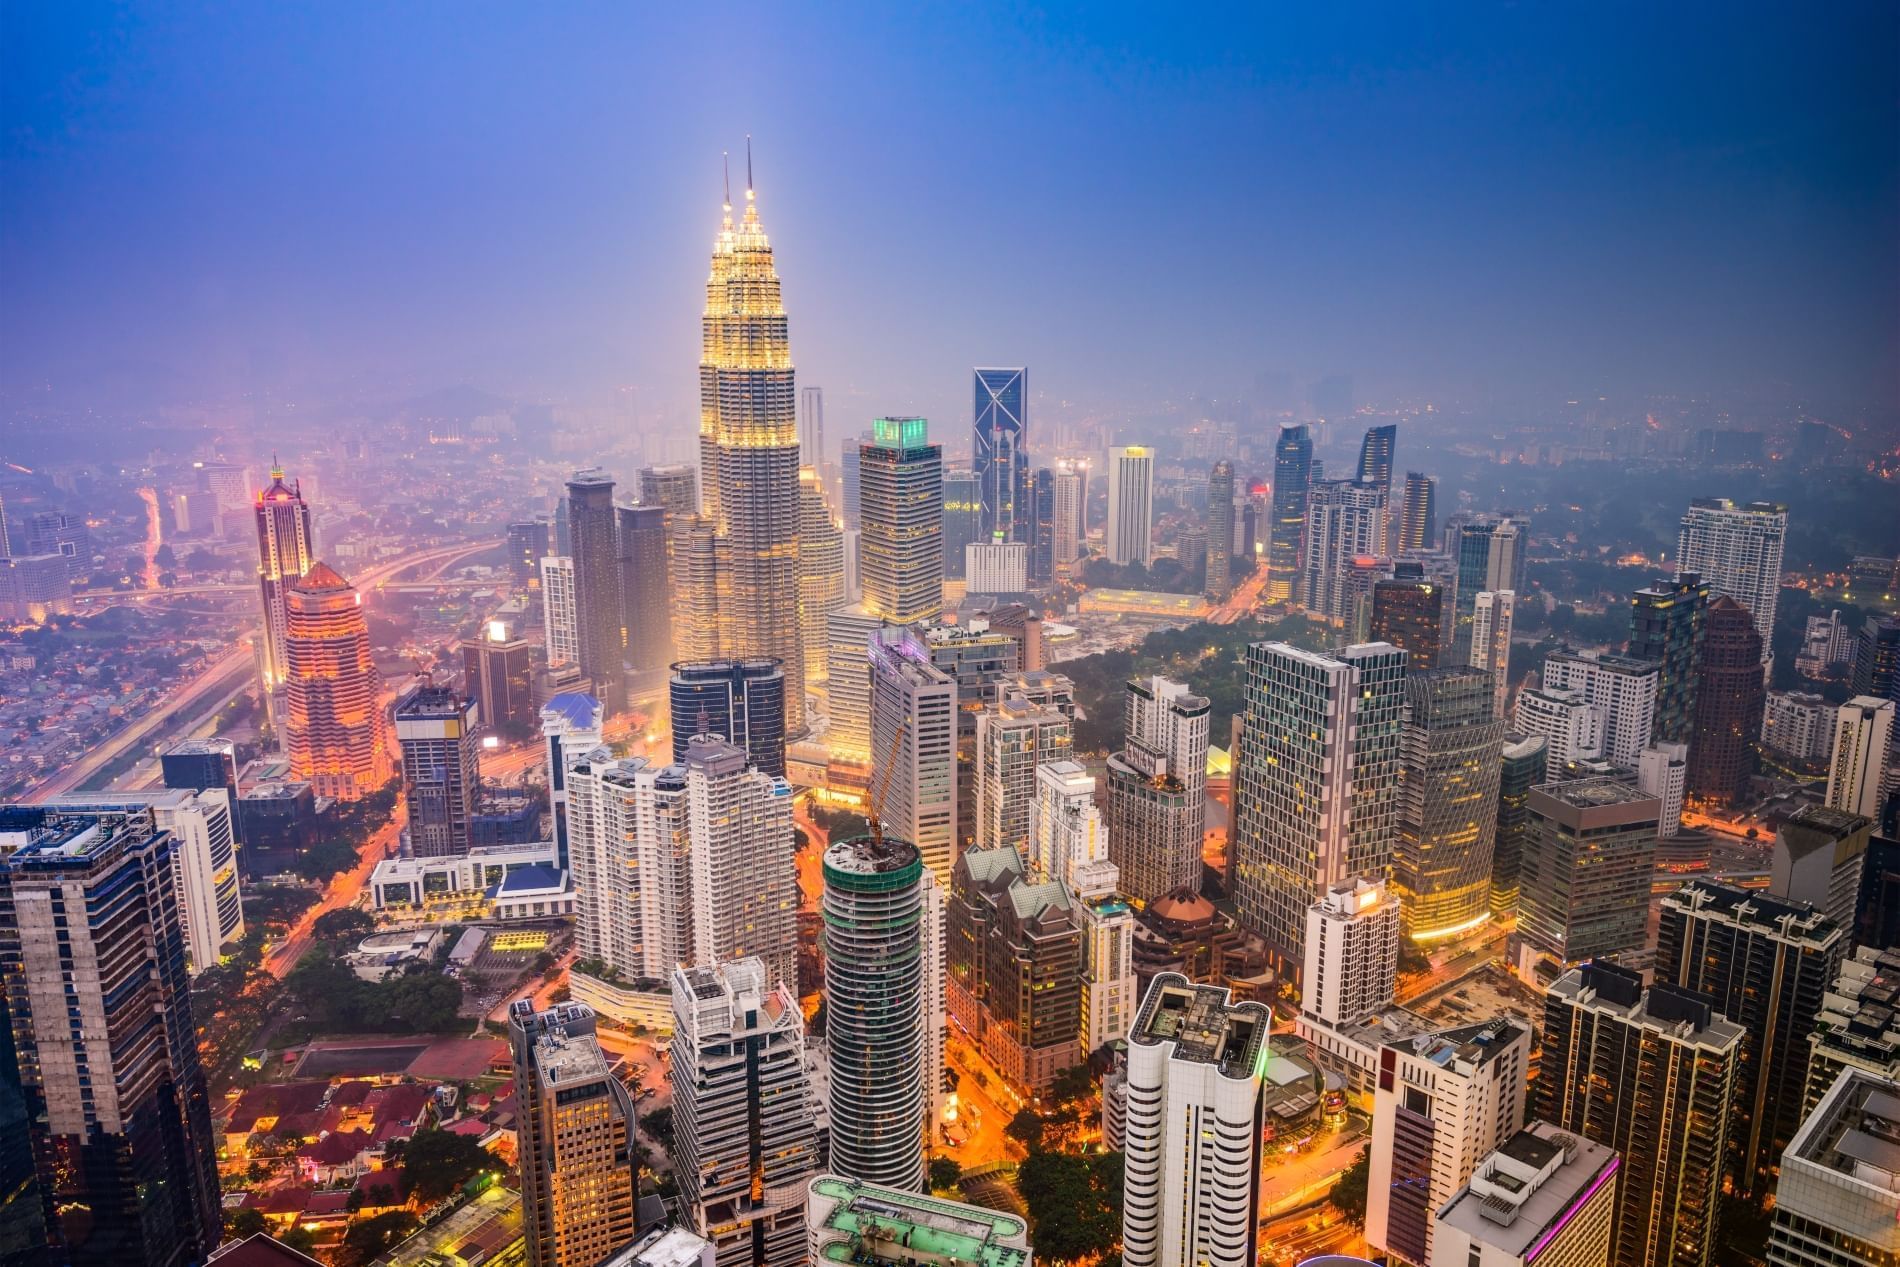 Night aerial view of Kuala Lumpur with bright lights